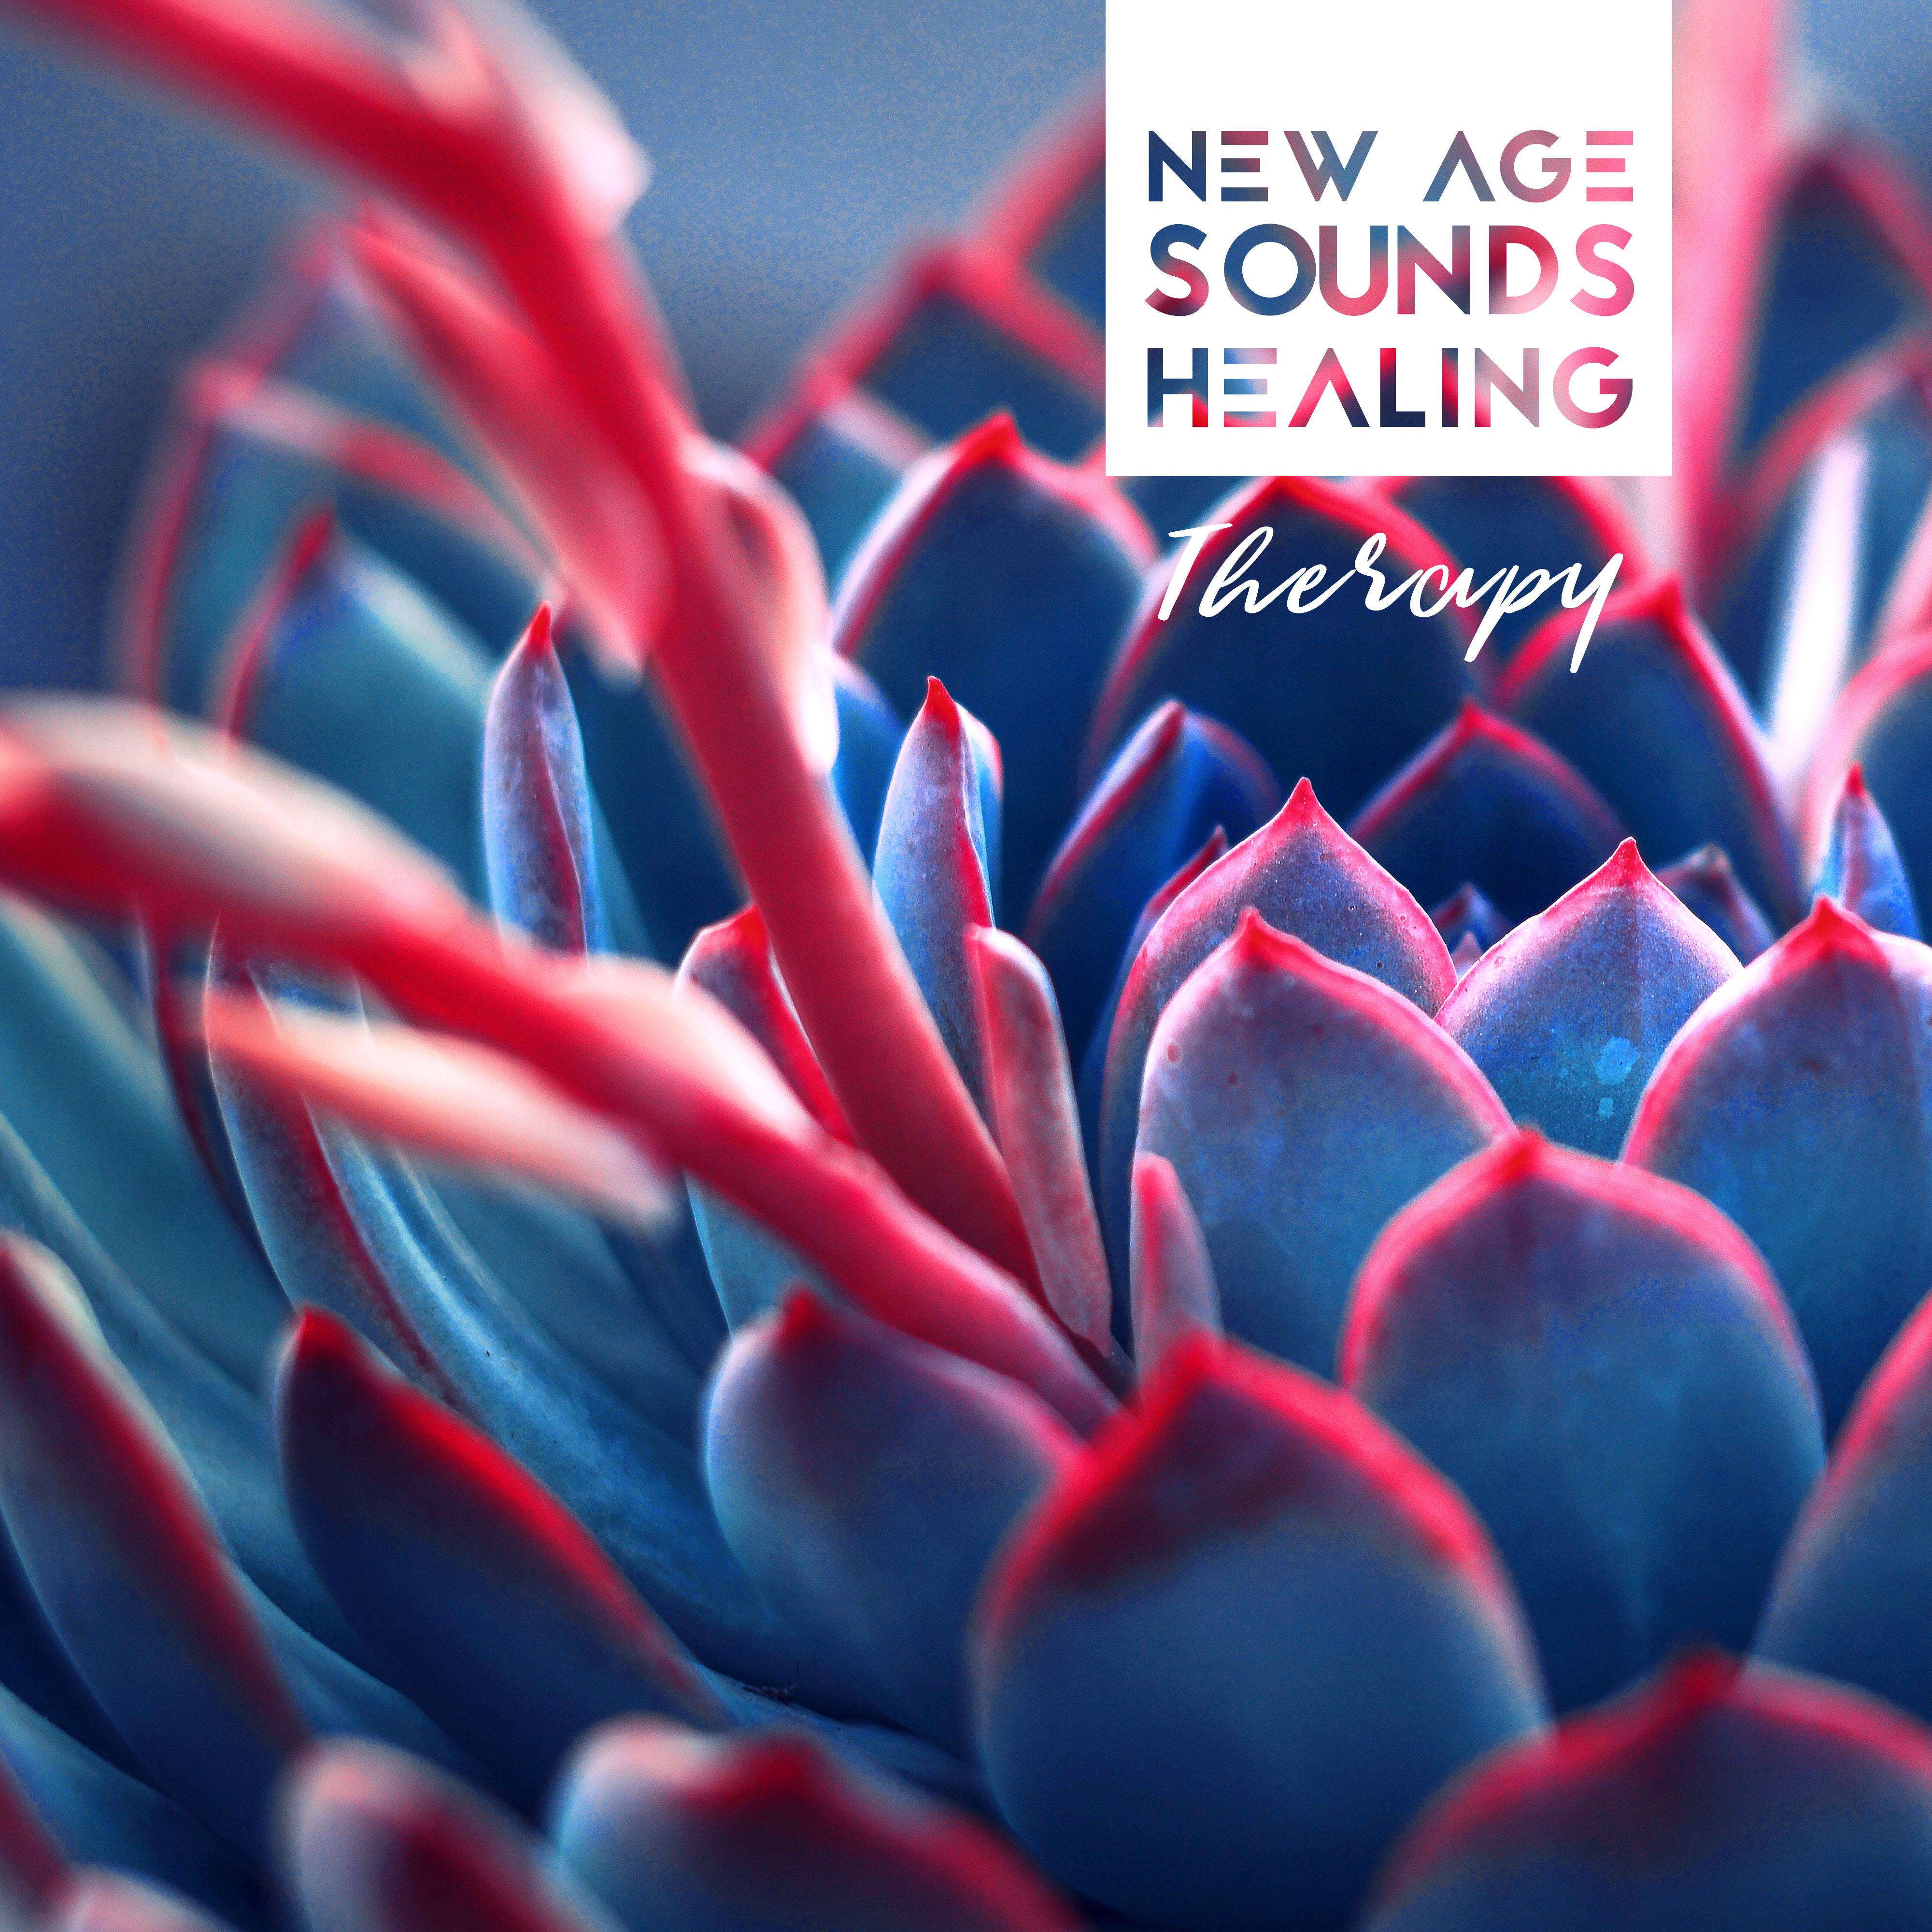 New Age Sounds Healing Therapy  Yoga  Relax Music Compilation